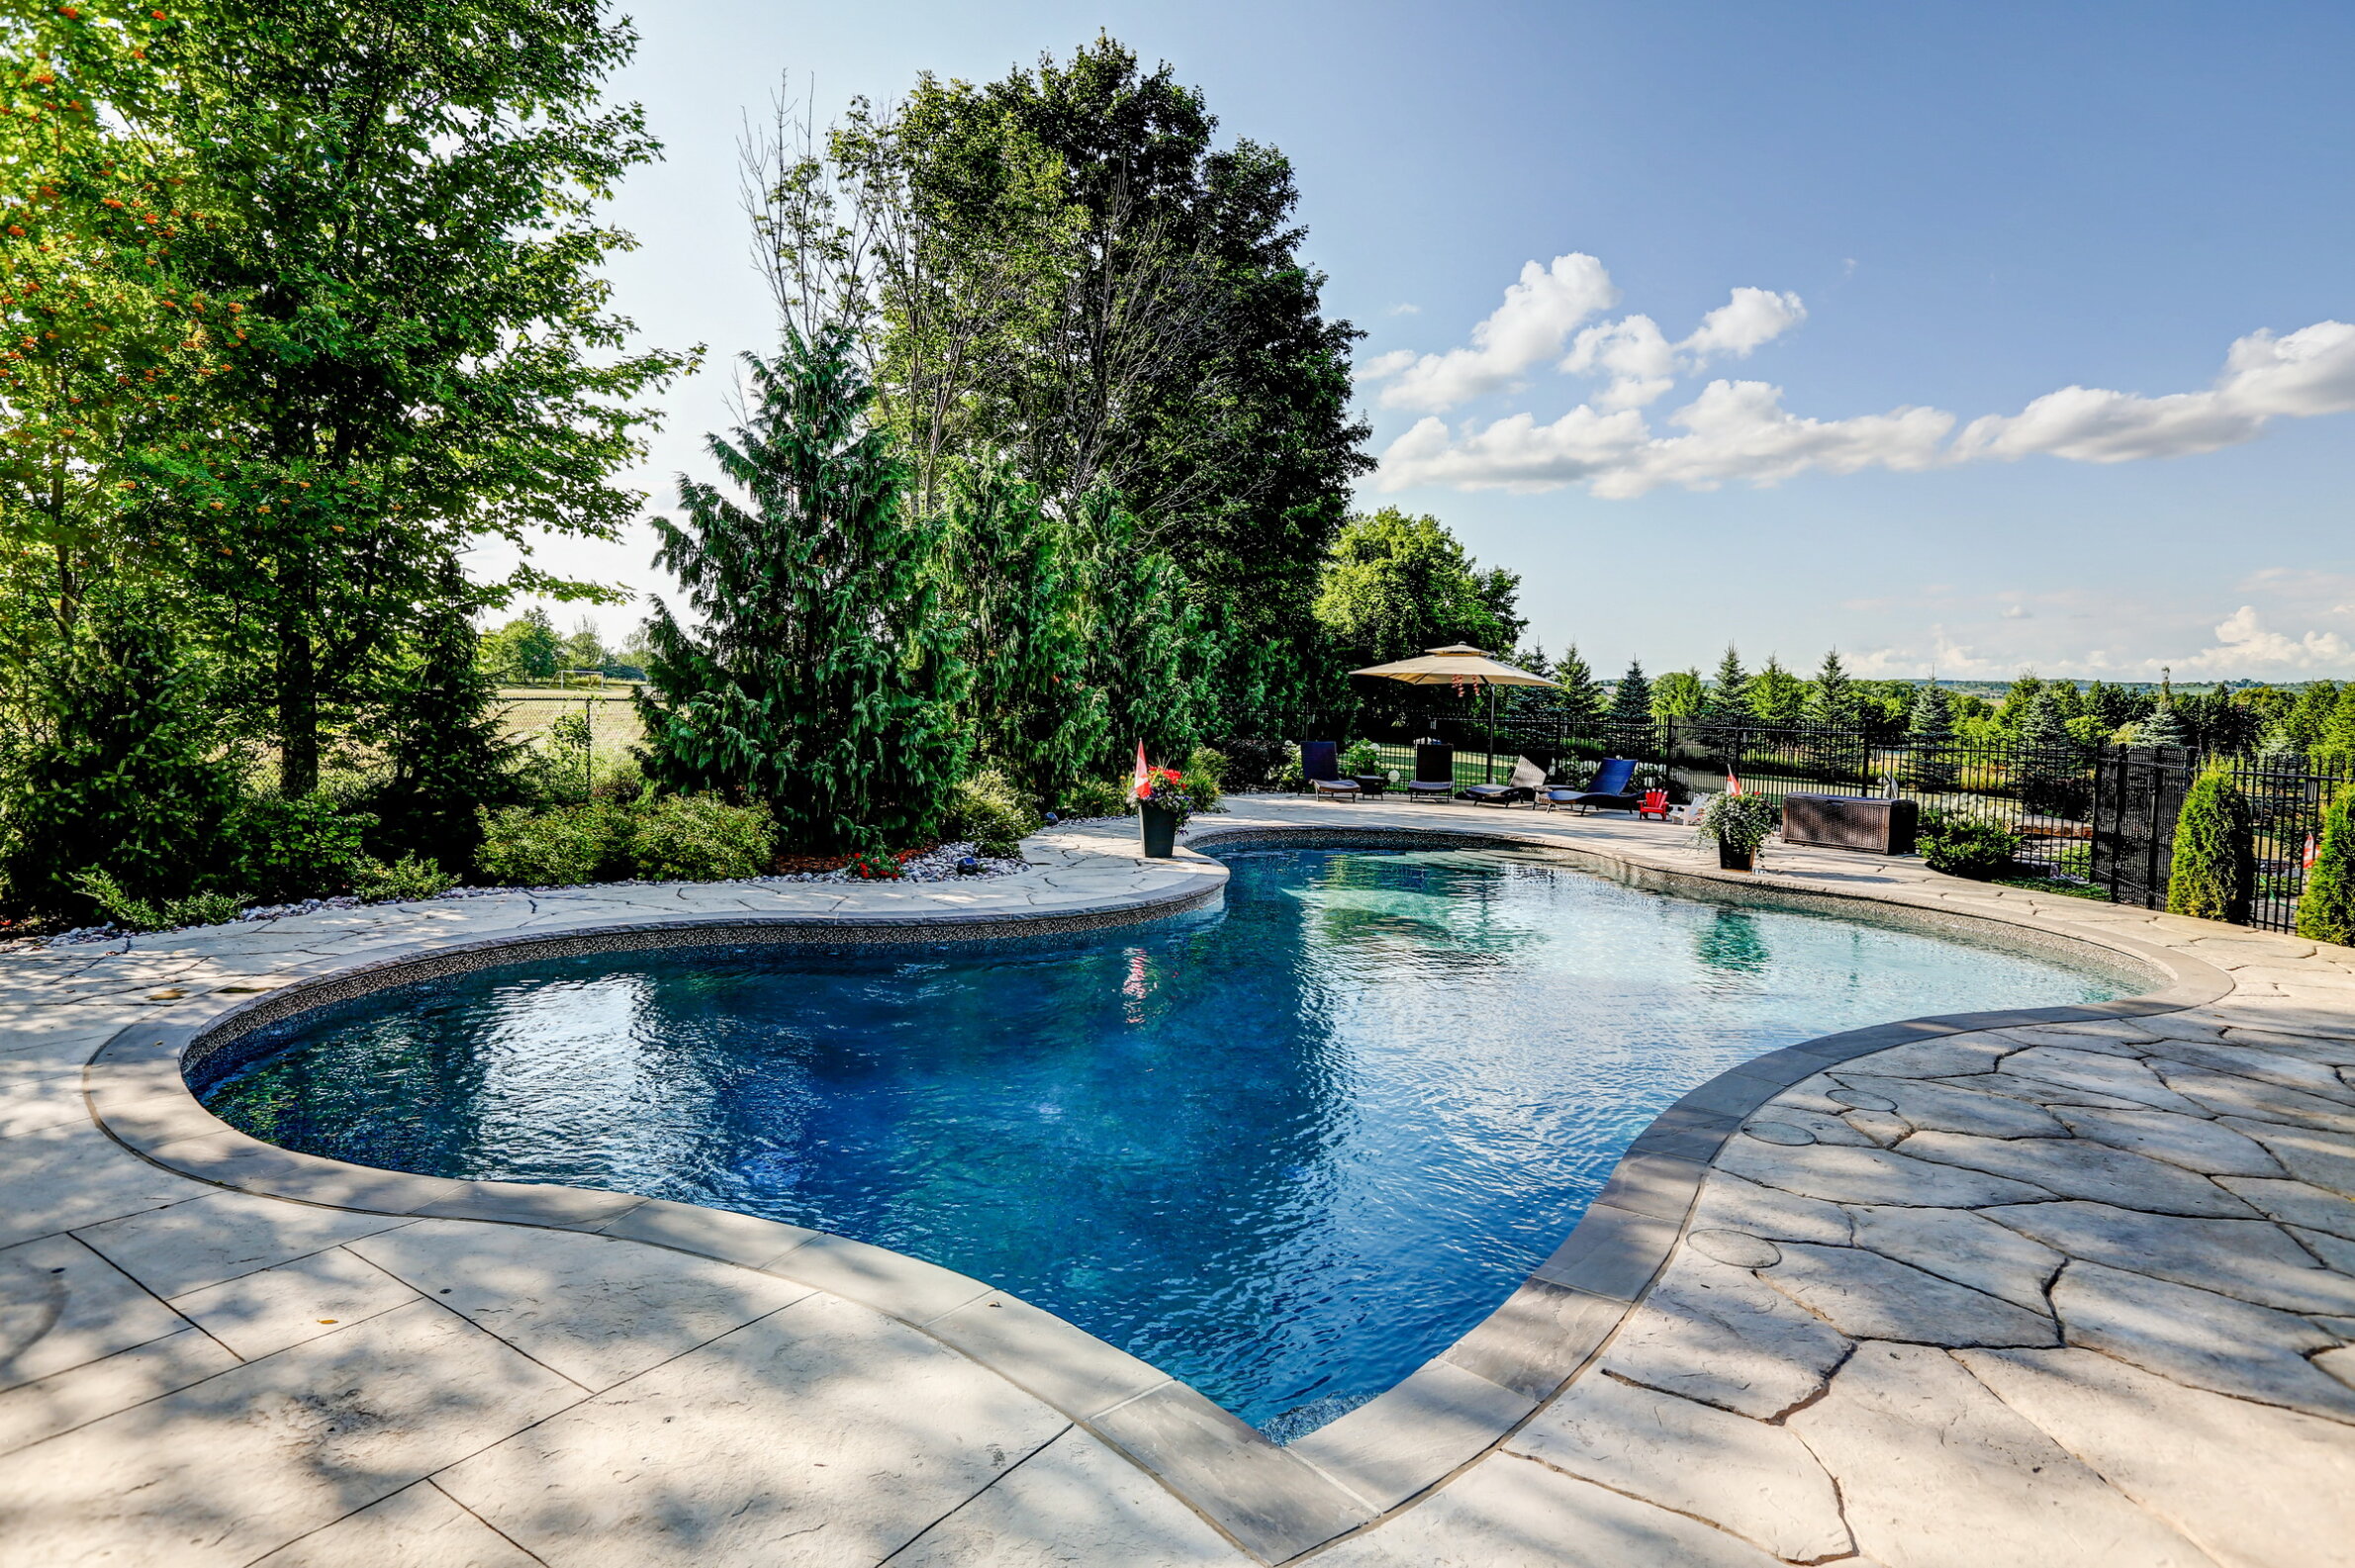 A luxurious backyard with an inviting curved swimming pool, patio, loungers, and lush trees under a clear blue sky with scattered clouds.